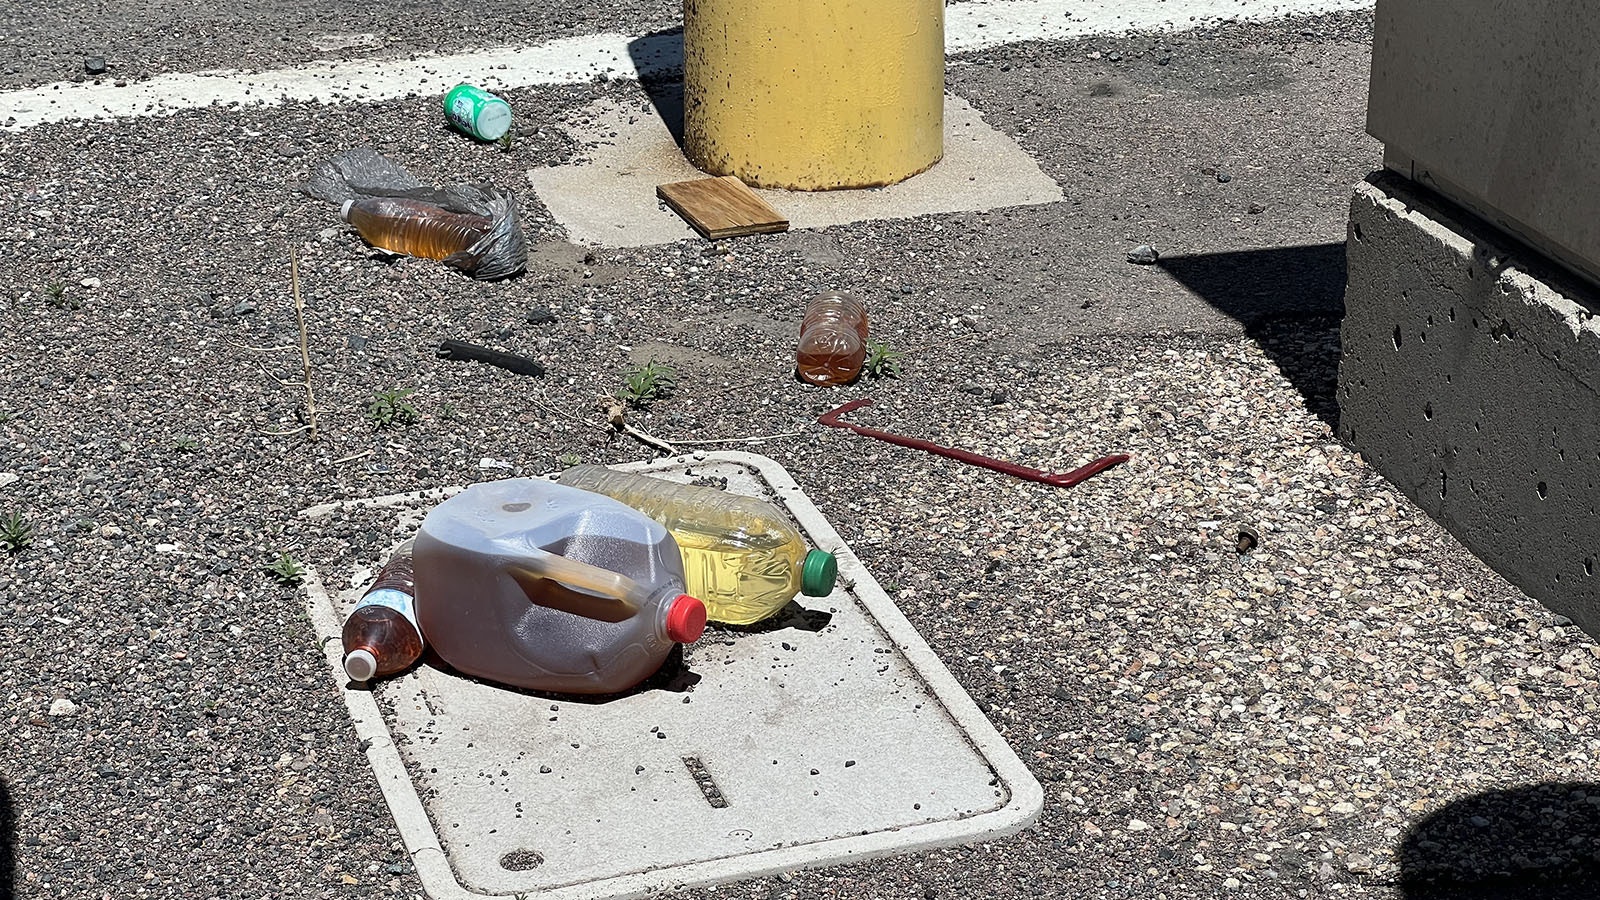 Among the trash left at Wyoming Interstate 80 rest stops are bottles filled with urine that are chucked out windows rather than disposed of in provided trash containers.